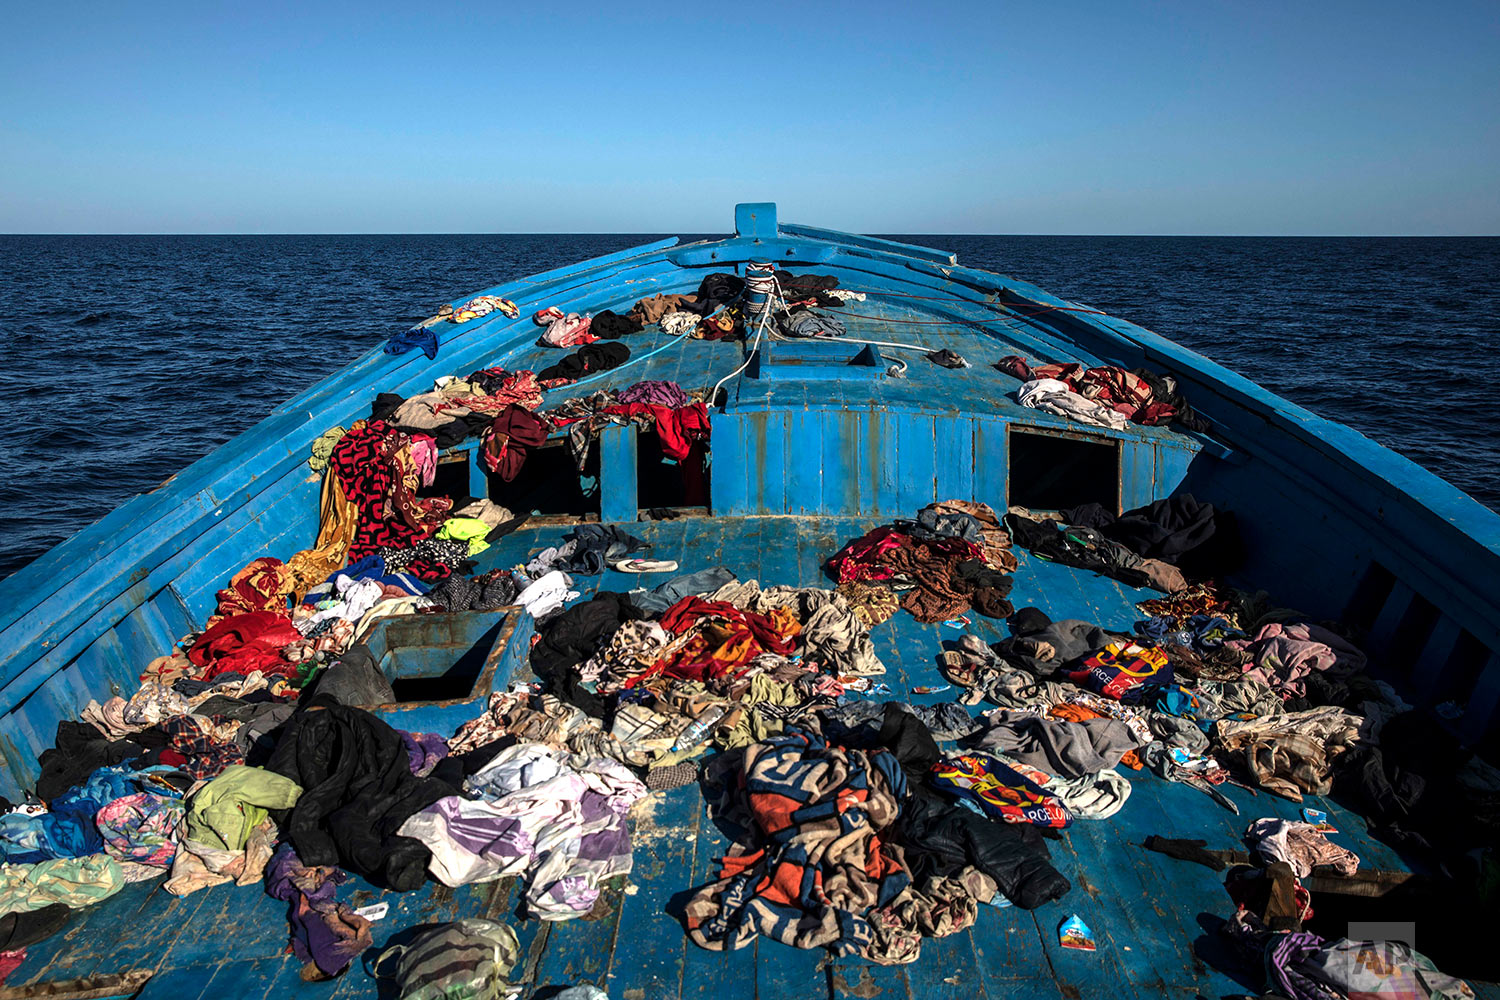  In this Tuesday, Jan. 16, 2018 photo, a wooden boat used by 450 refugees and migrants, mostly from Eritrea, remains abandoned off the Libyan coast after they were rescued by aid workers of the Spanish NGO Proactiva Open Arms, 34 miles north of Kasr-